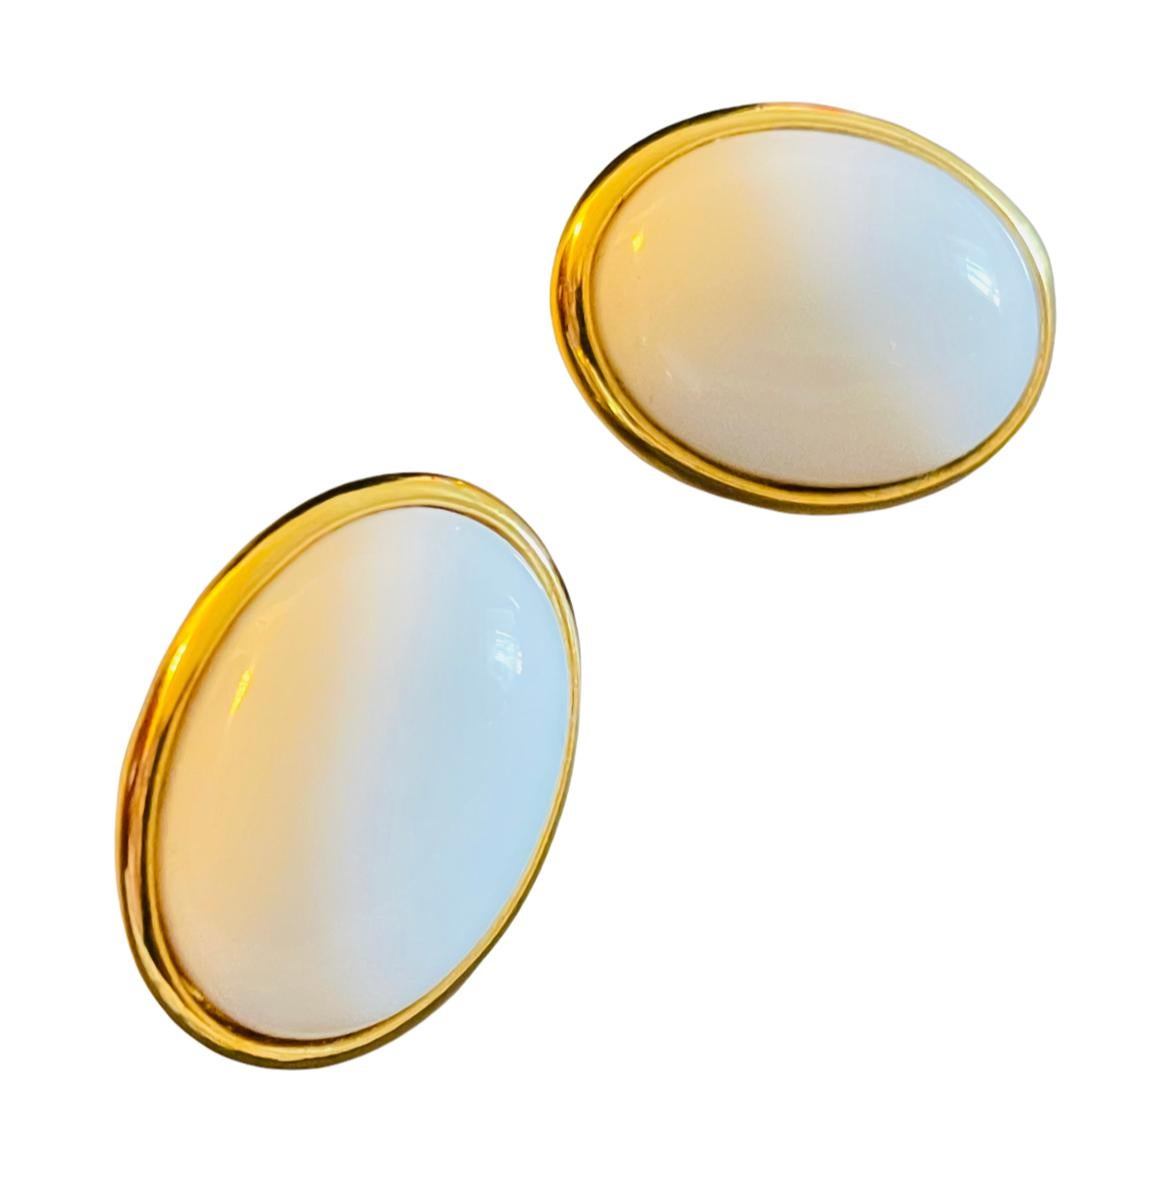 DETAILS

• signed TRIFARI TM

• gold tone

• white lucite cabochons

MEASUREMENTS  

• 1.06” by 0.75” wide

CONDITION

• excellent vintage condition with minimal signs of wear 

❤️❤️ VINTAGE DESIGNER JEWELRY ❤️❤️ 